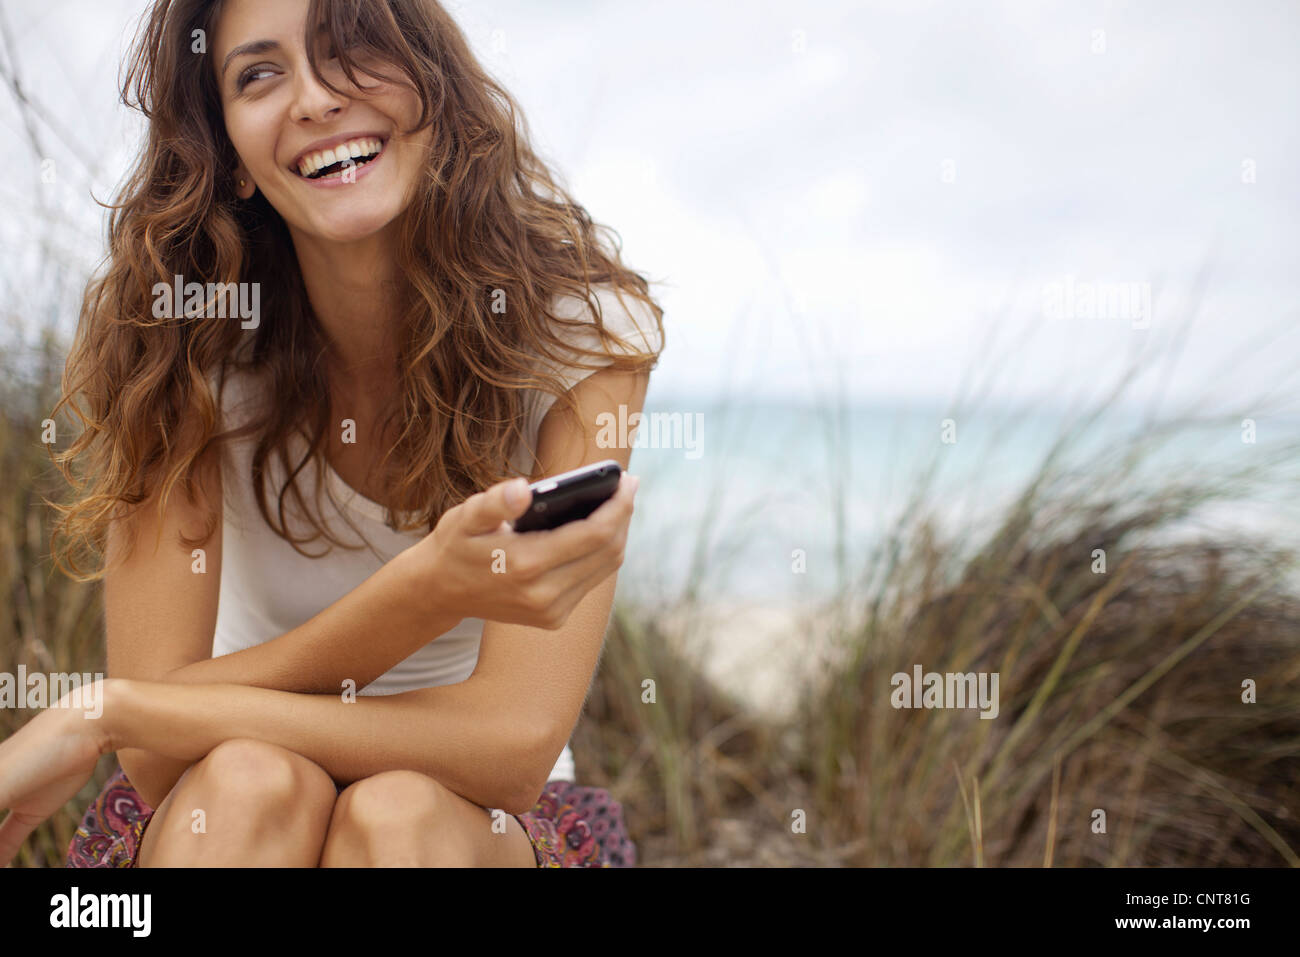 Happy young woman with cell phone Banque D'Images